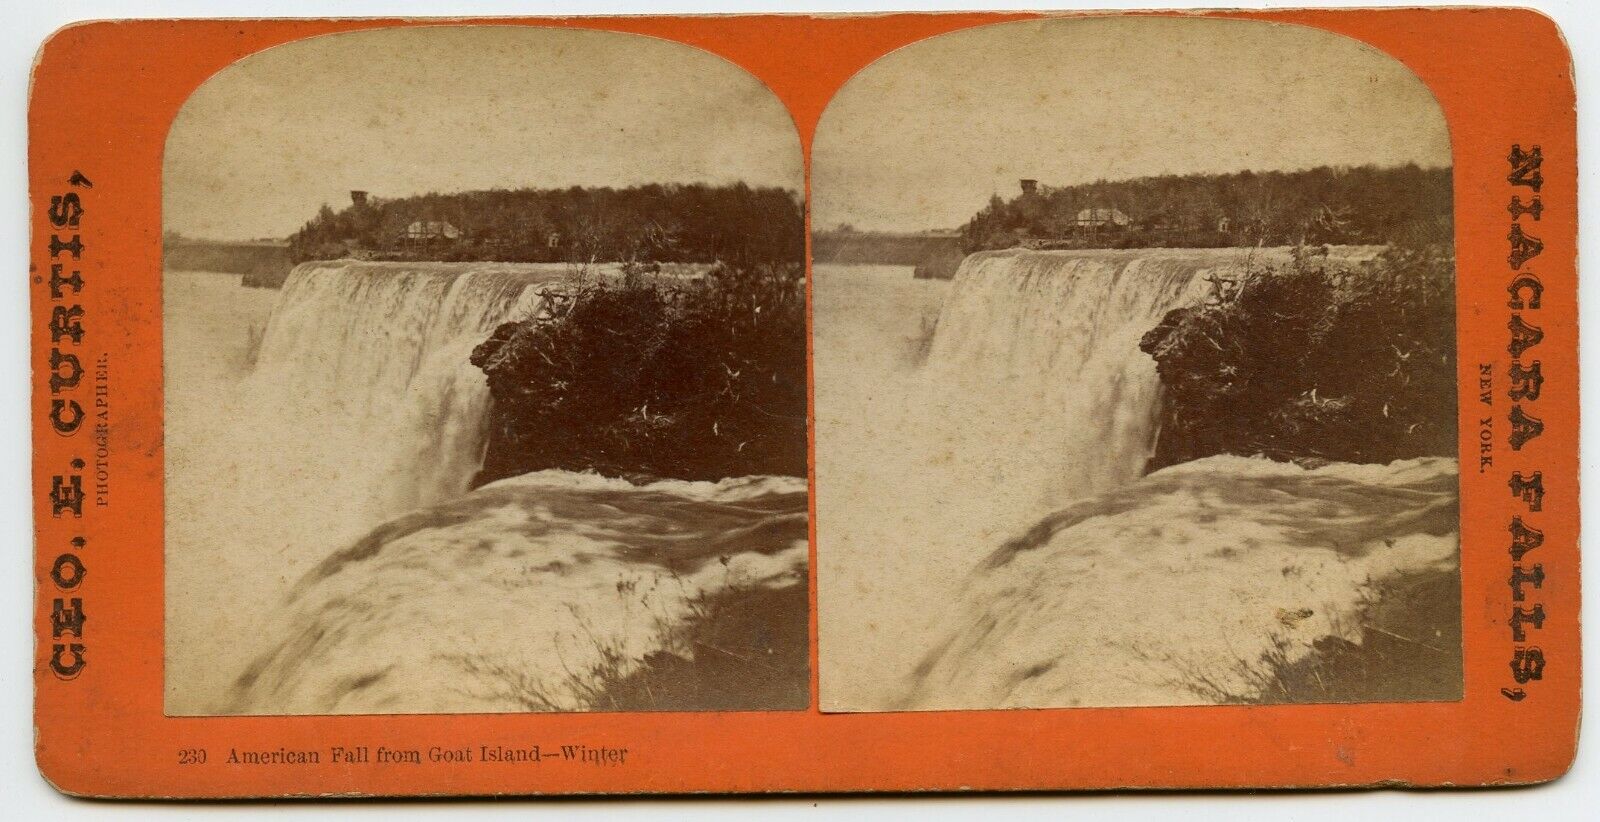 Oct.26th 1892 E.L.J. with Samuel , Niagara Falls Stereoview Photo by Curtis